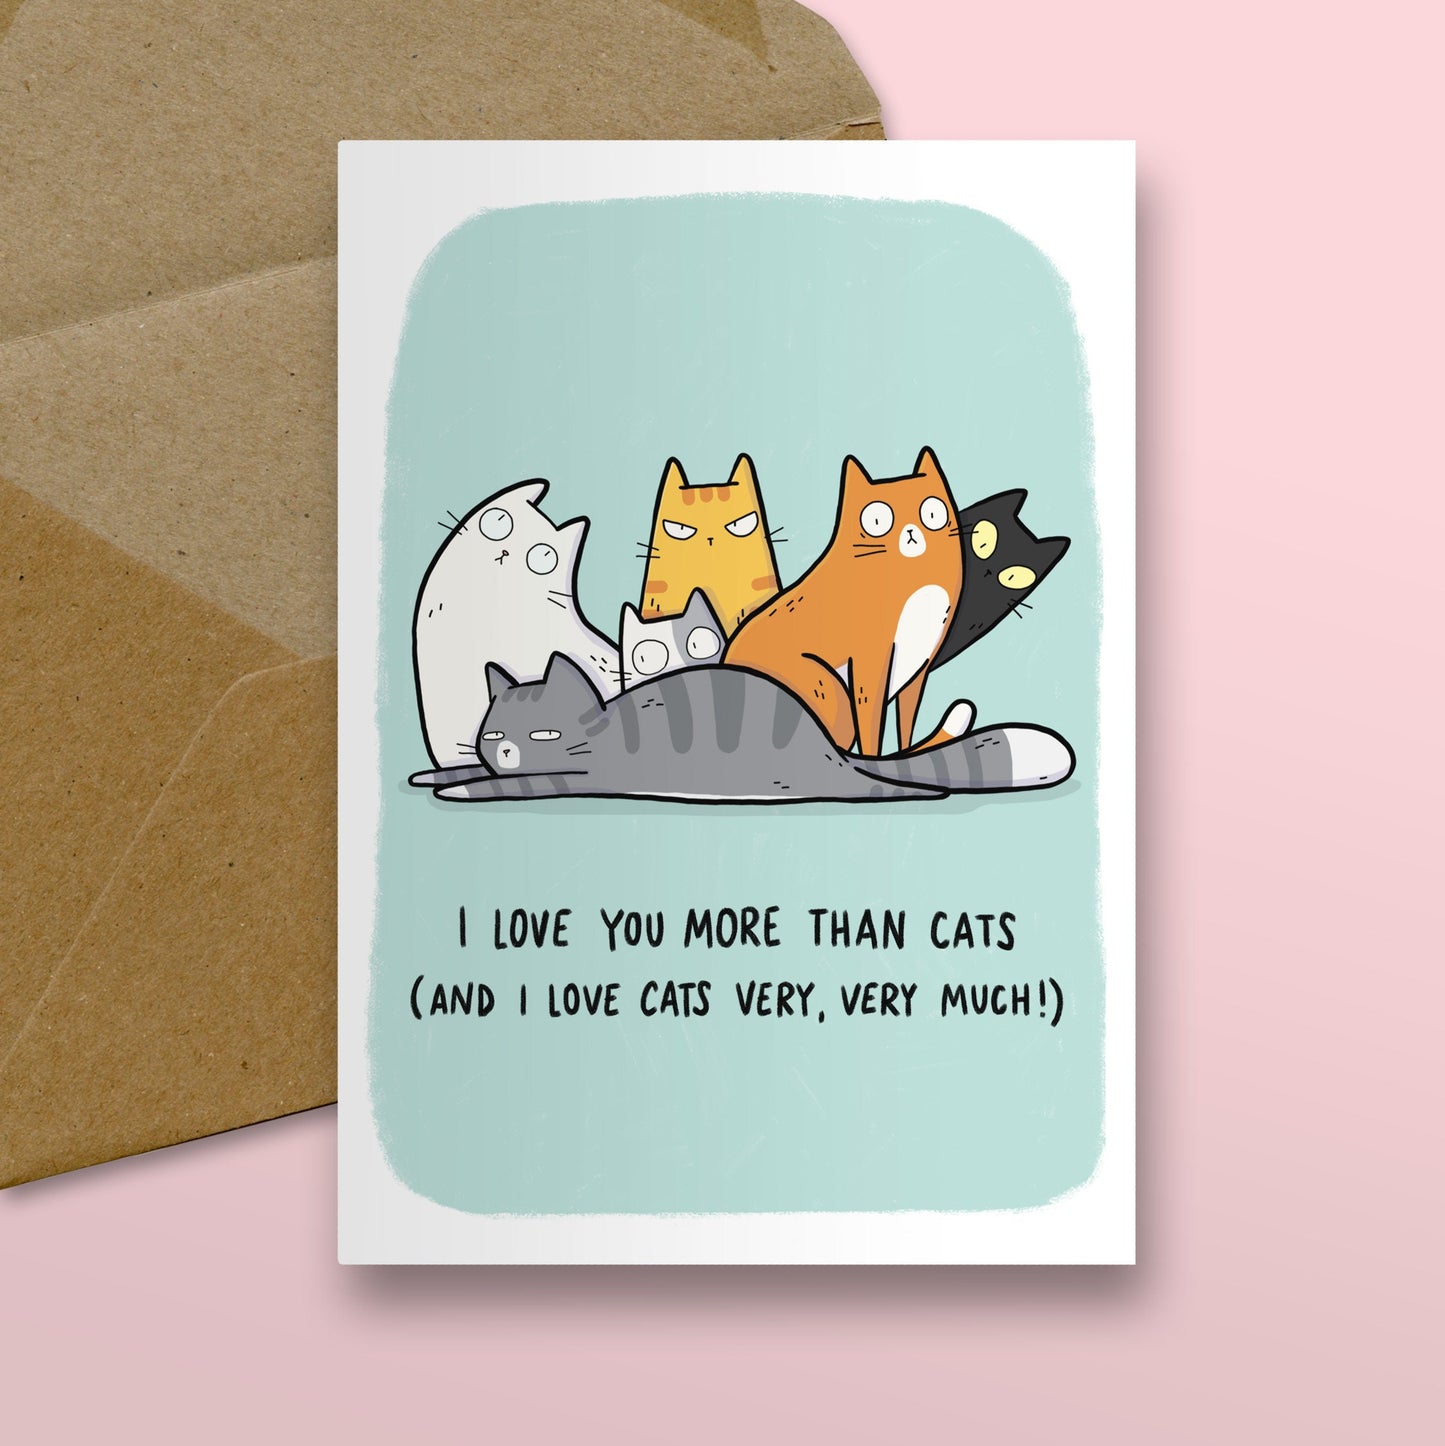 I Love You More Than Cats Card